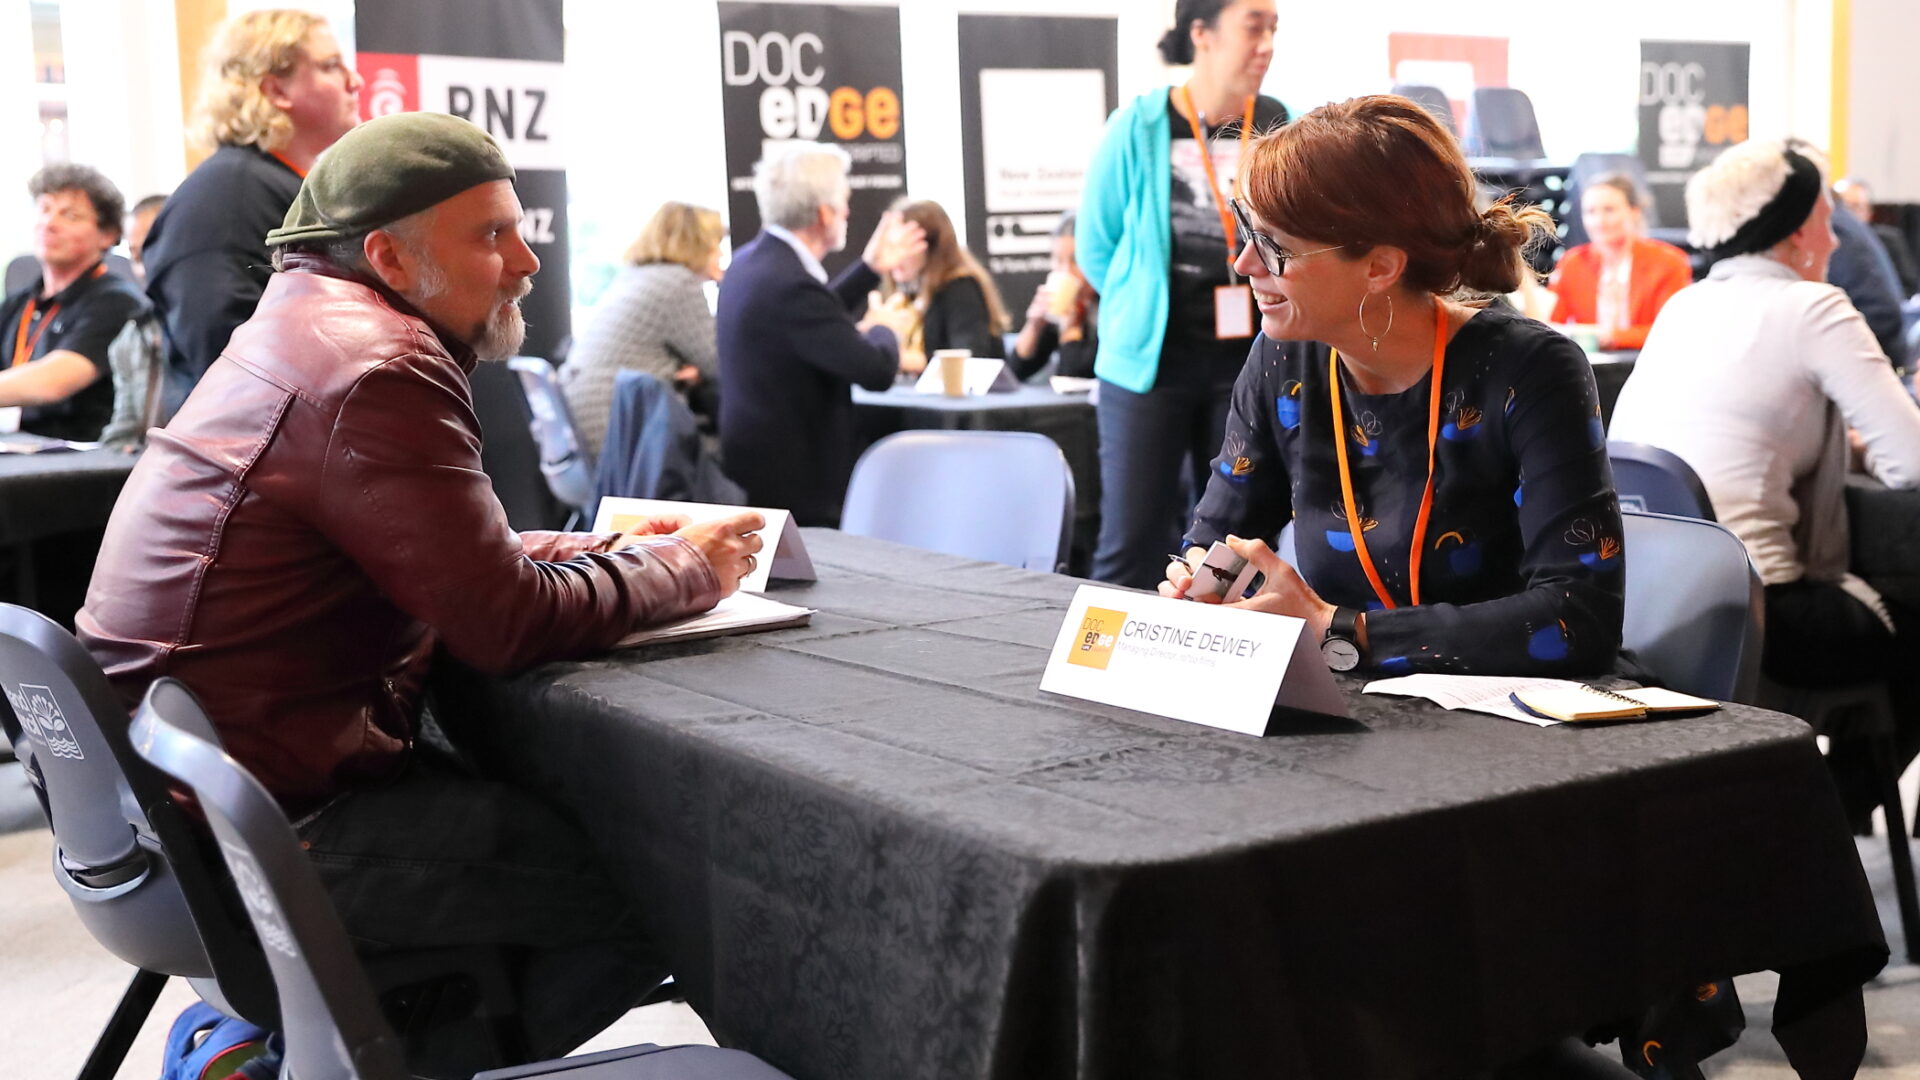 Date-A-Doco 2019 during the Doc Edge Forum